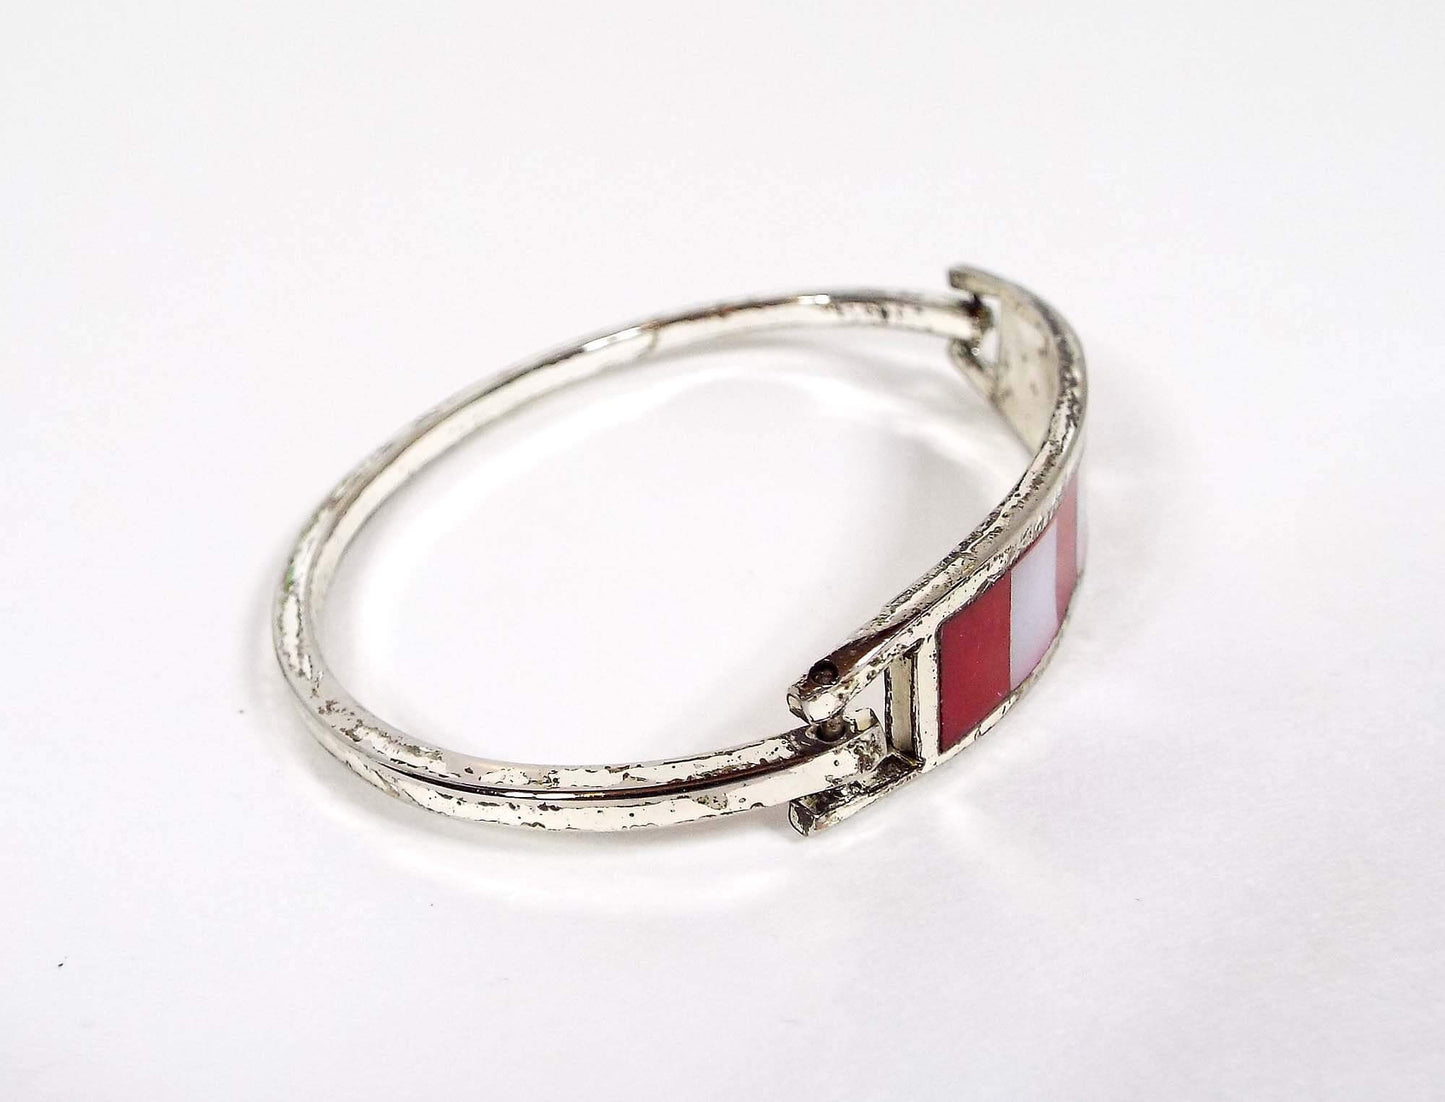 Vintage Red and White Striped Hinged Bangle Bracelet with Mother of Pearl